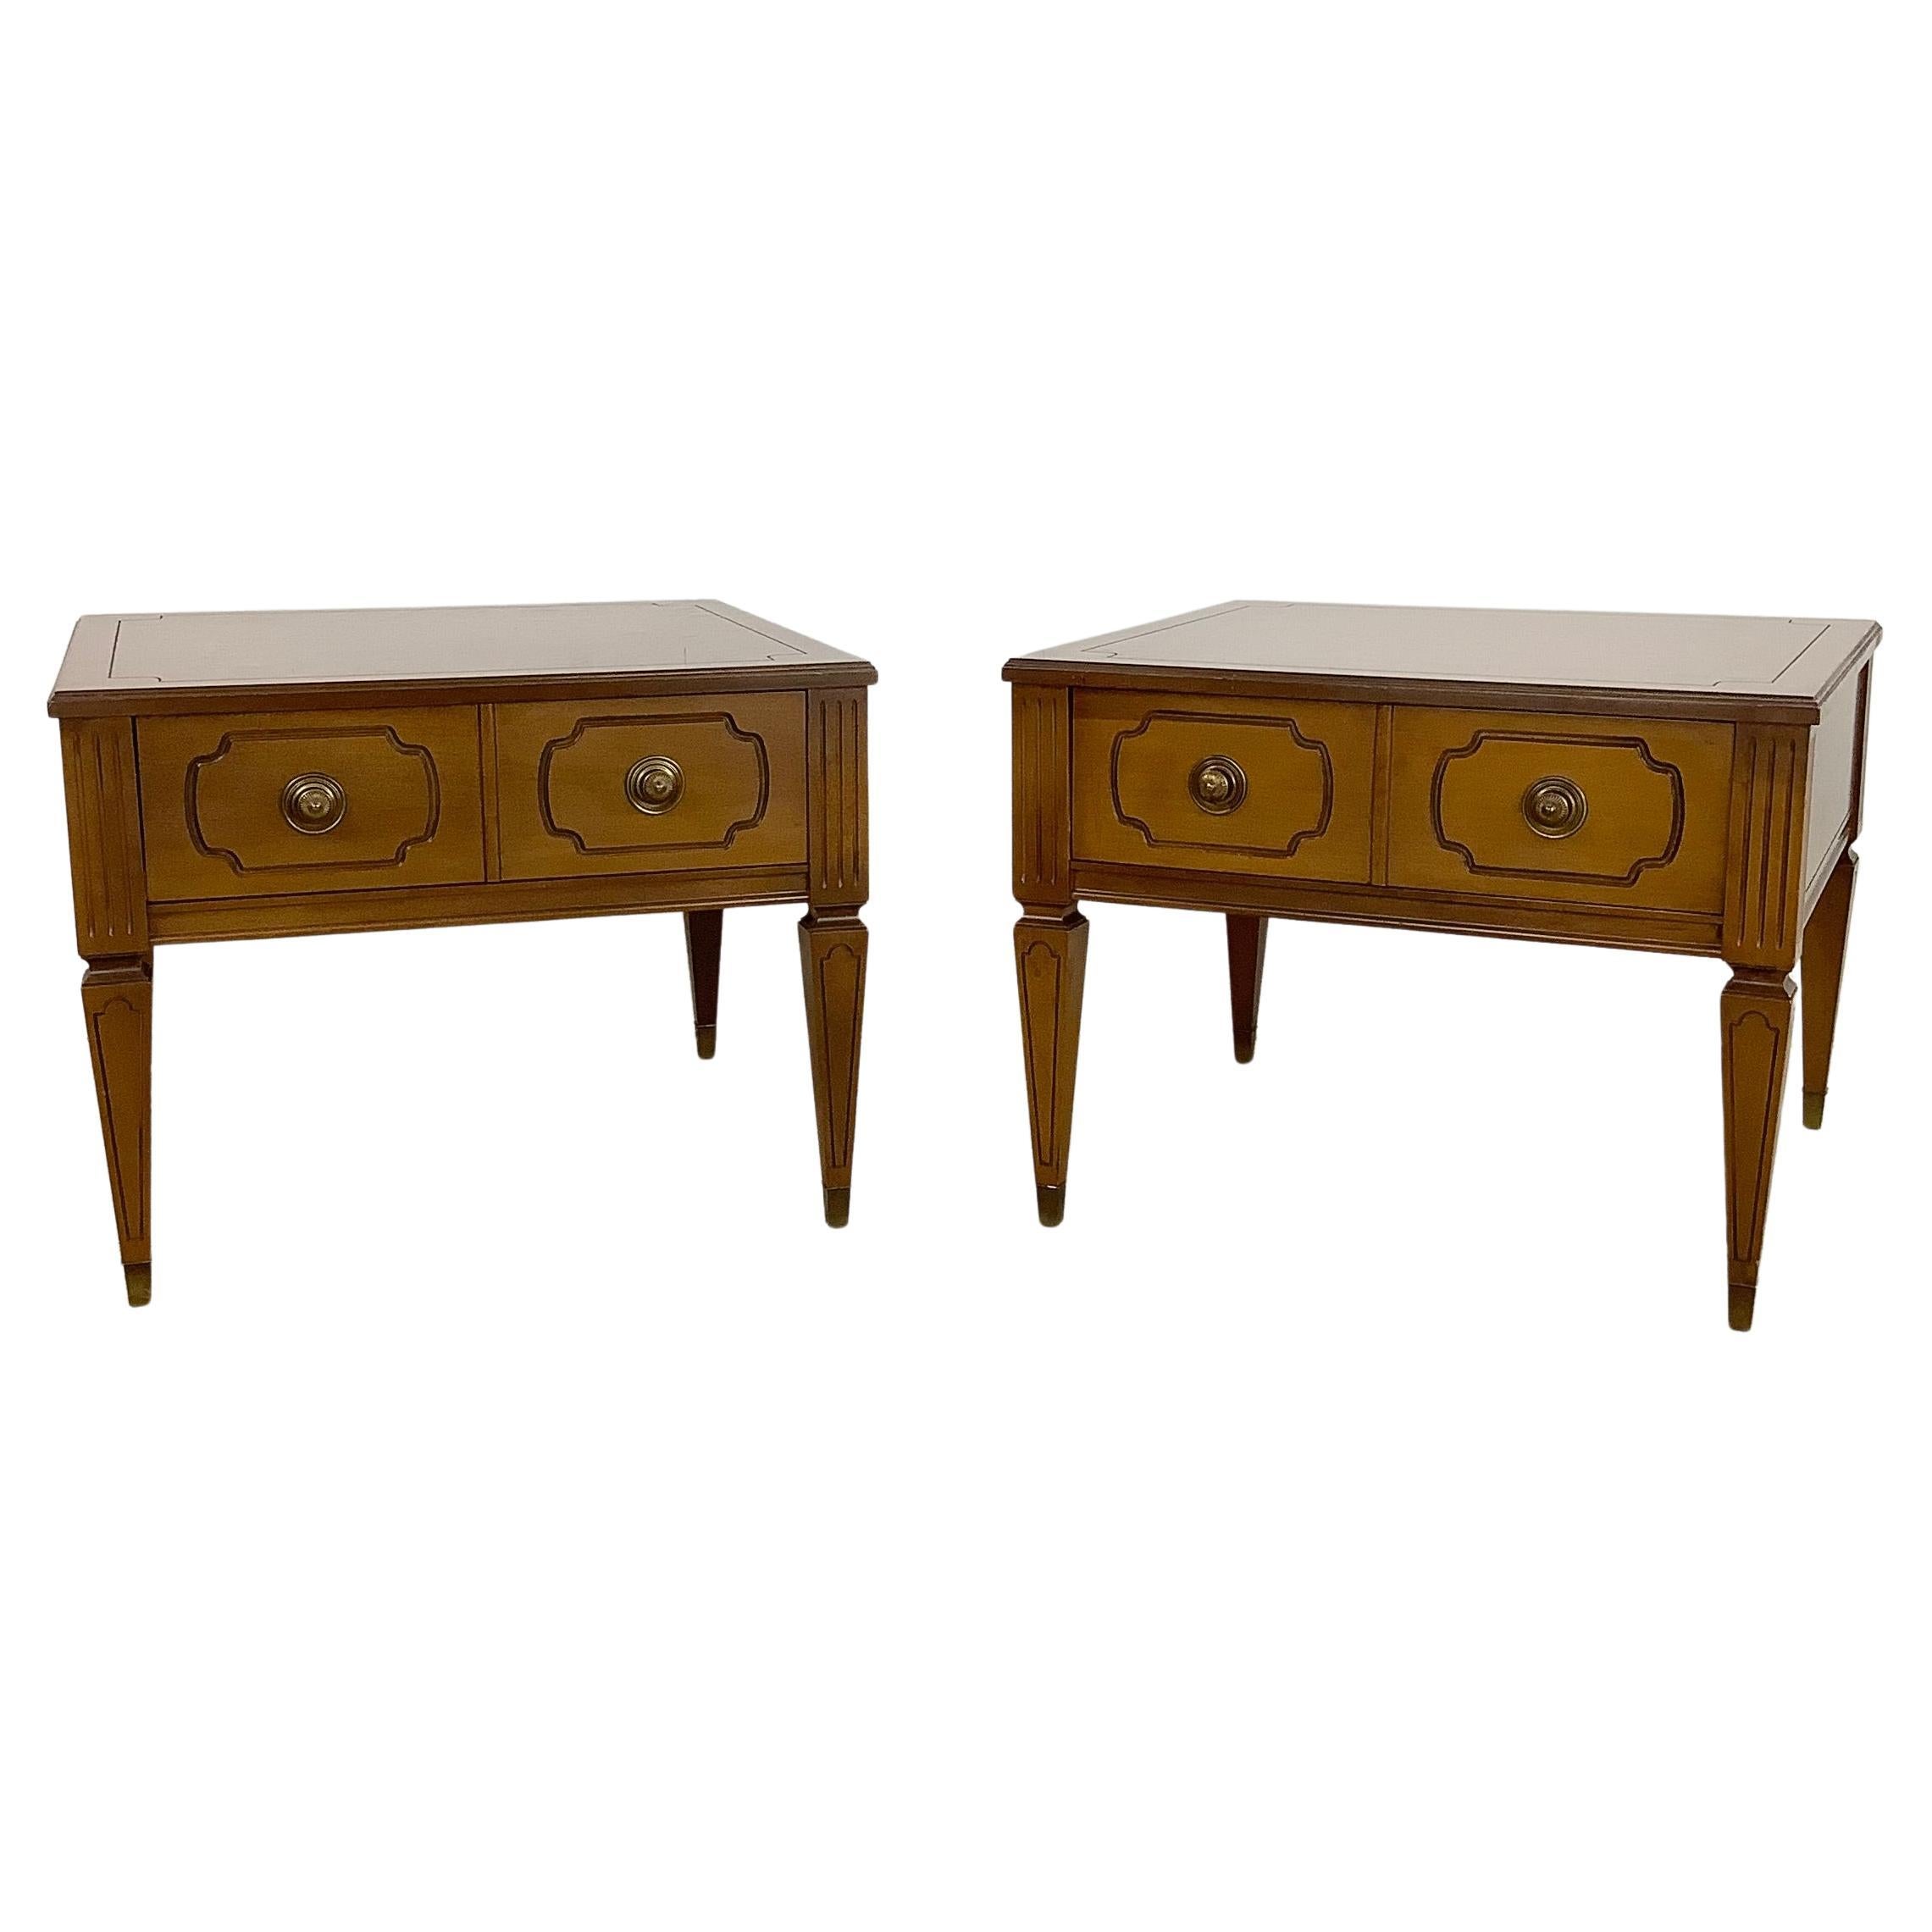 Vintage Square End Tables with Single Drawer by Mersman Furniture- Pair